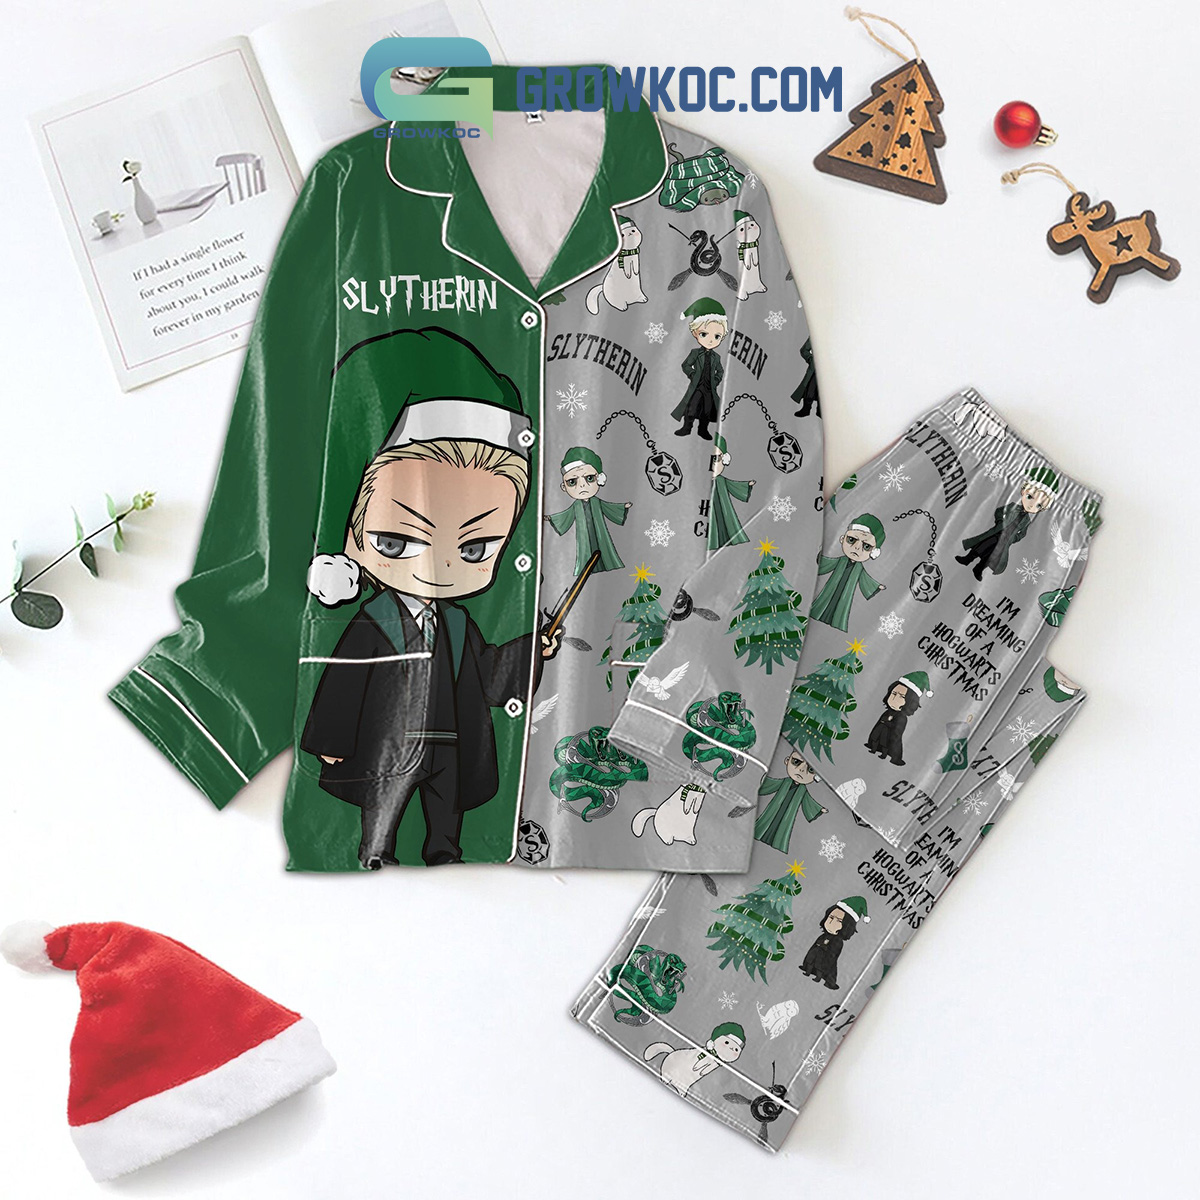 Harry Potter Slytherin Is'm A Dreaming Of A Hogwarts Christmas Pajamas Sets